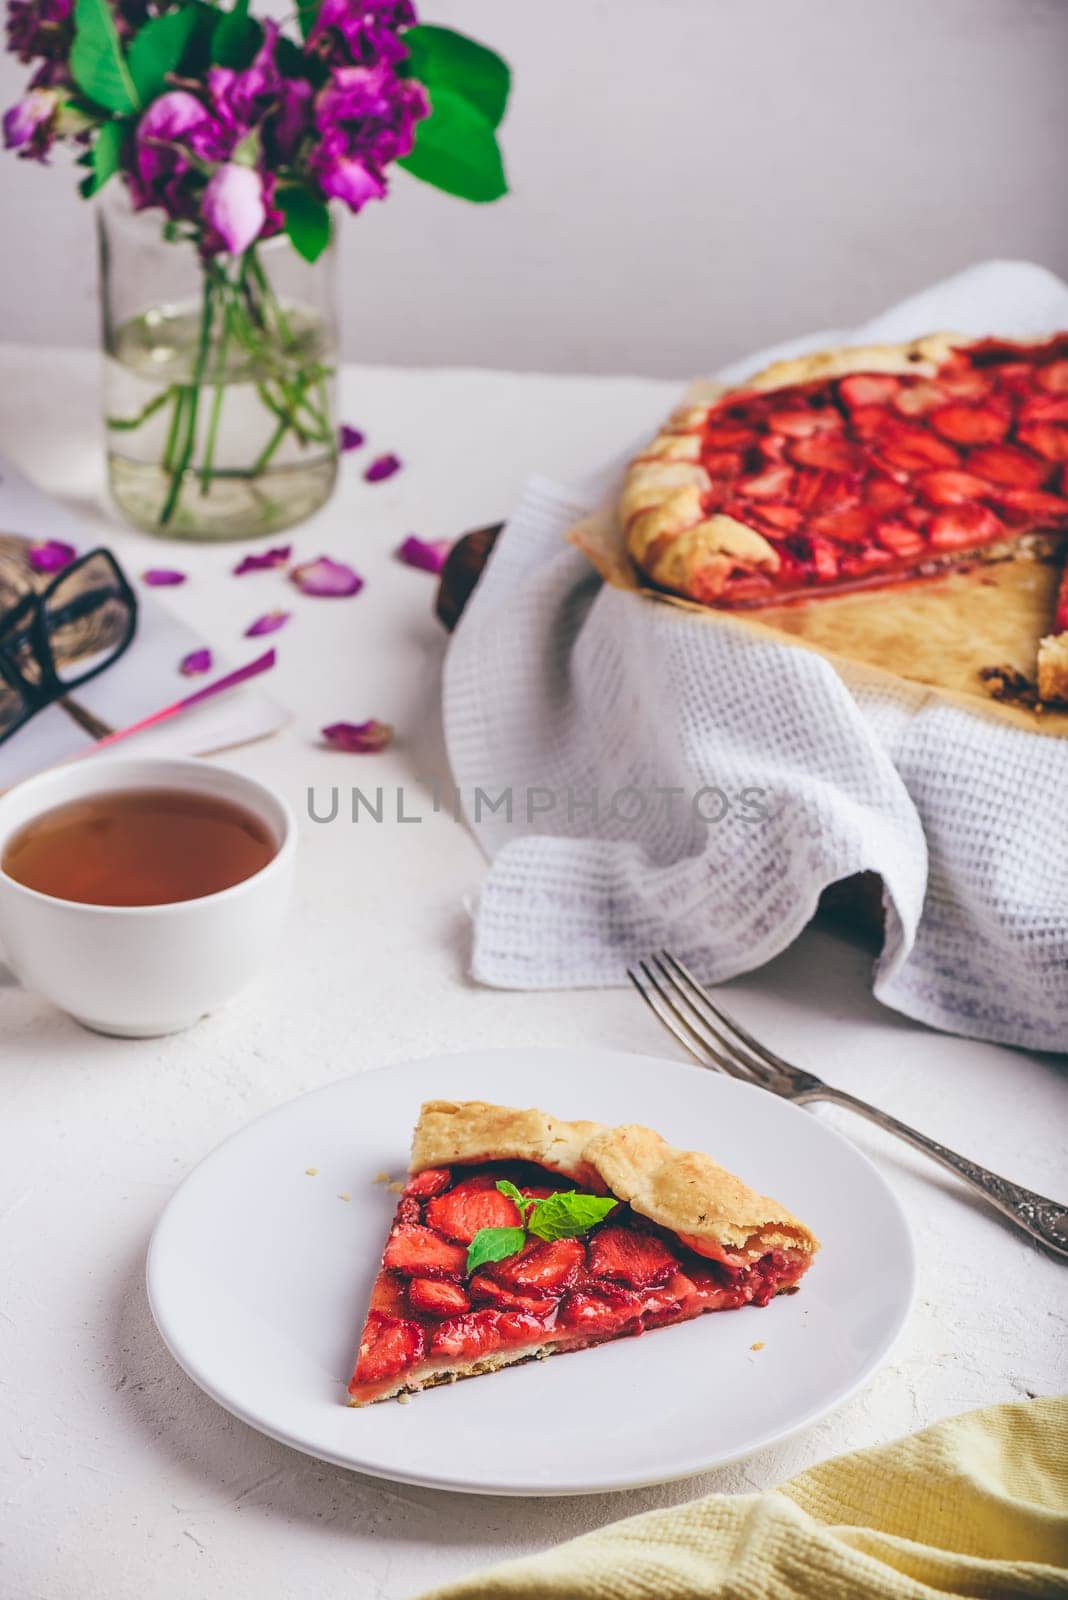 Slice Of Sweet Fresh Baked Strawberry Galette With Mint Leaves On White Plate by Seva_blsv